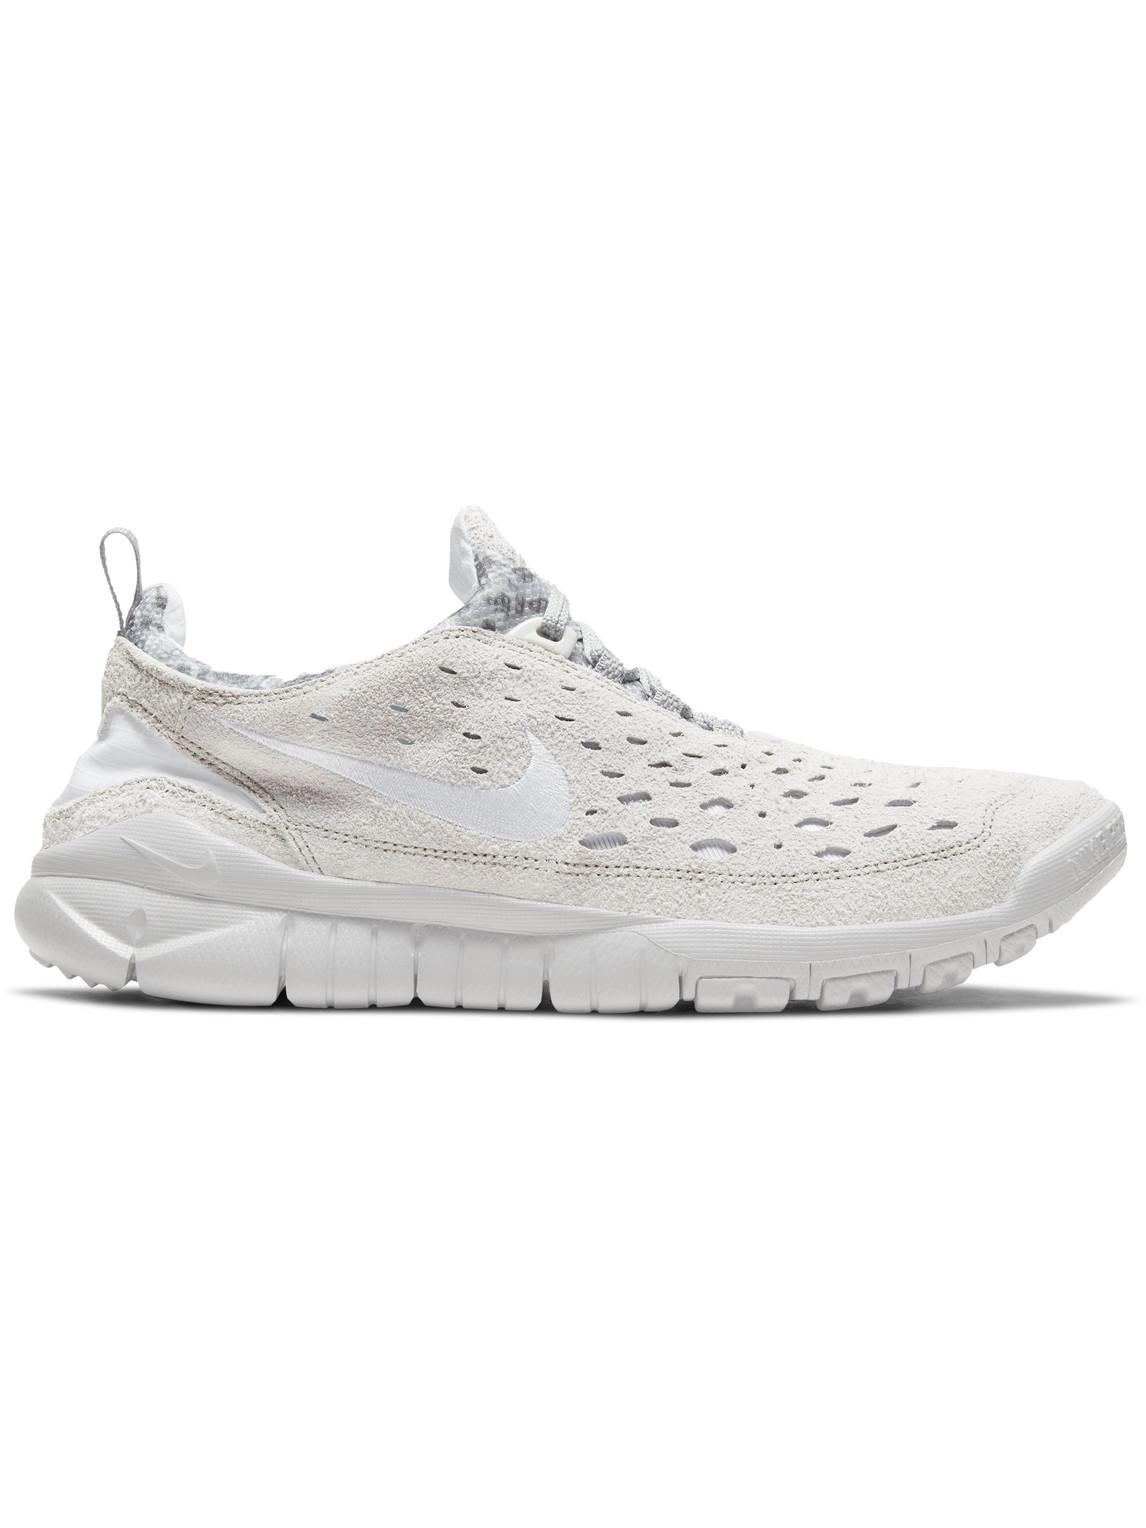 Nike Free Run Trail Suede And Mesh Sneakers in Gray for Men - Lyst